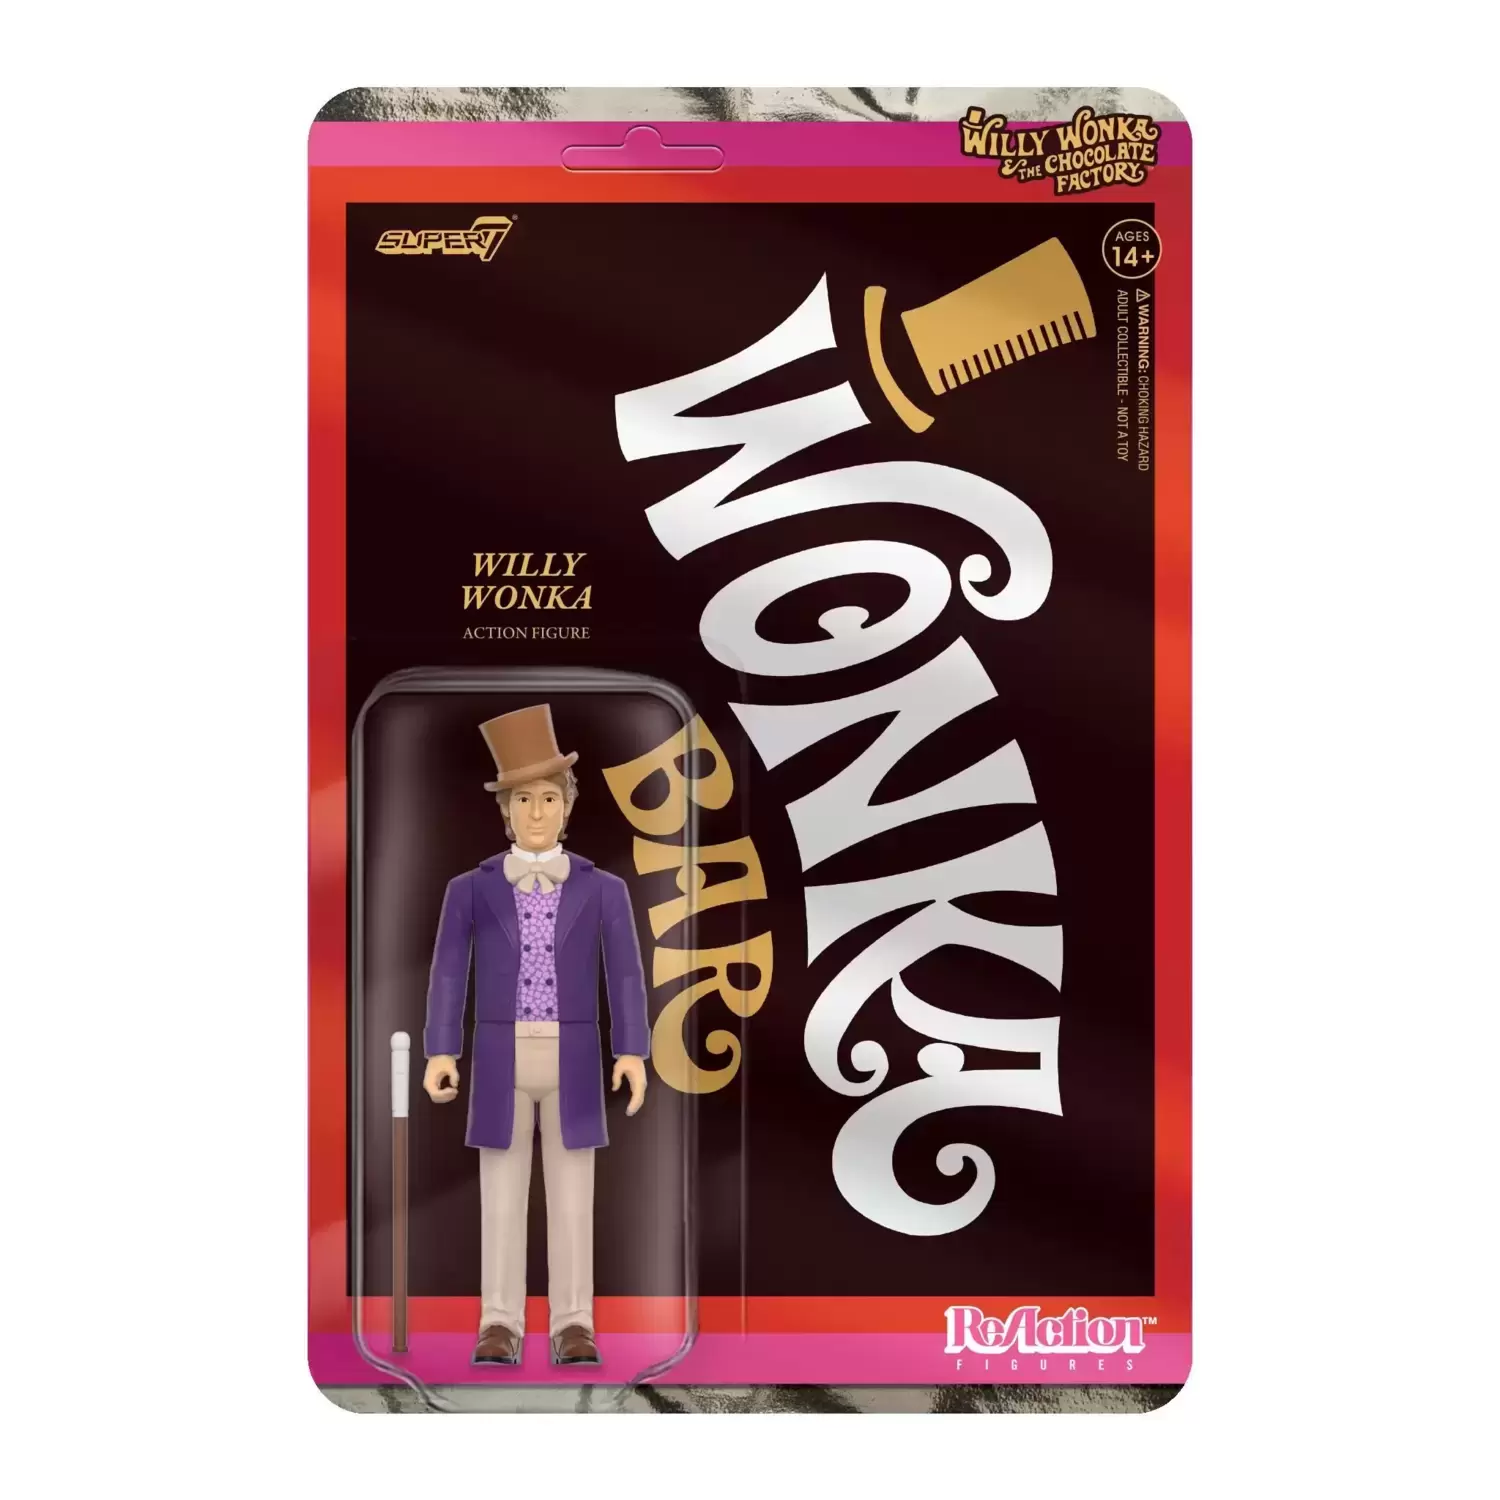 ReAction Figures - Willy Wonka & the Chocolate Factory - Willy Wonka